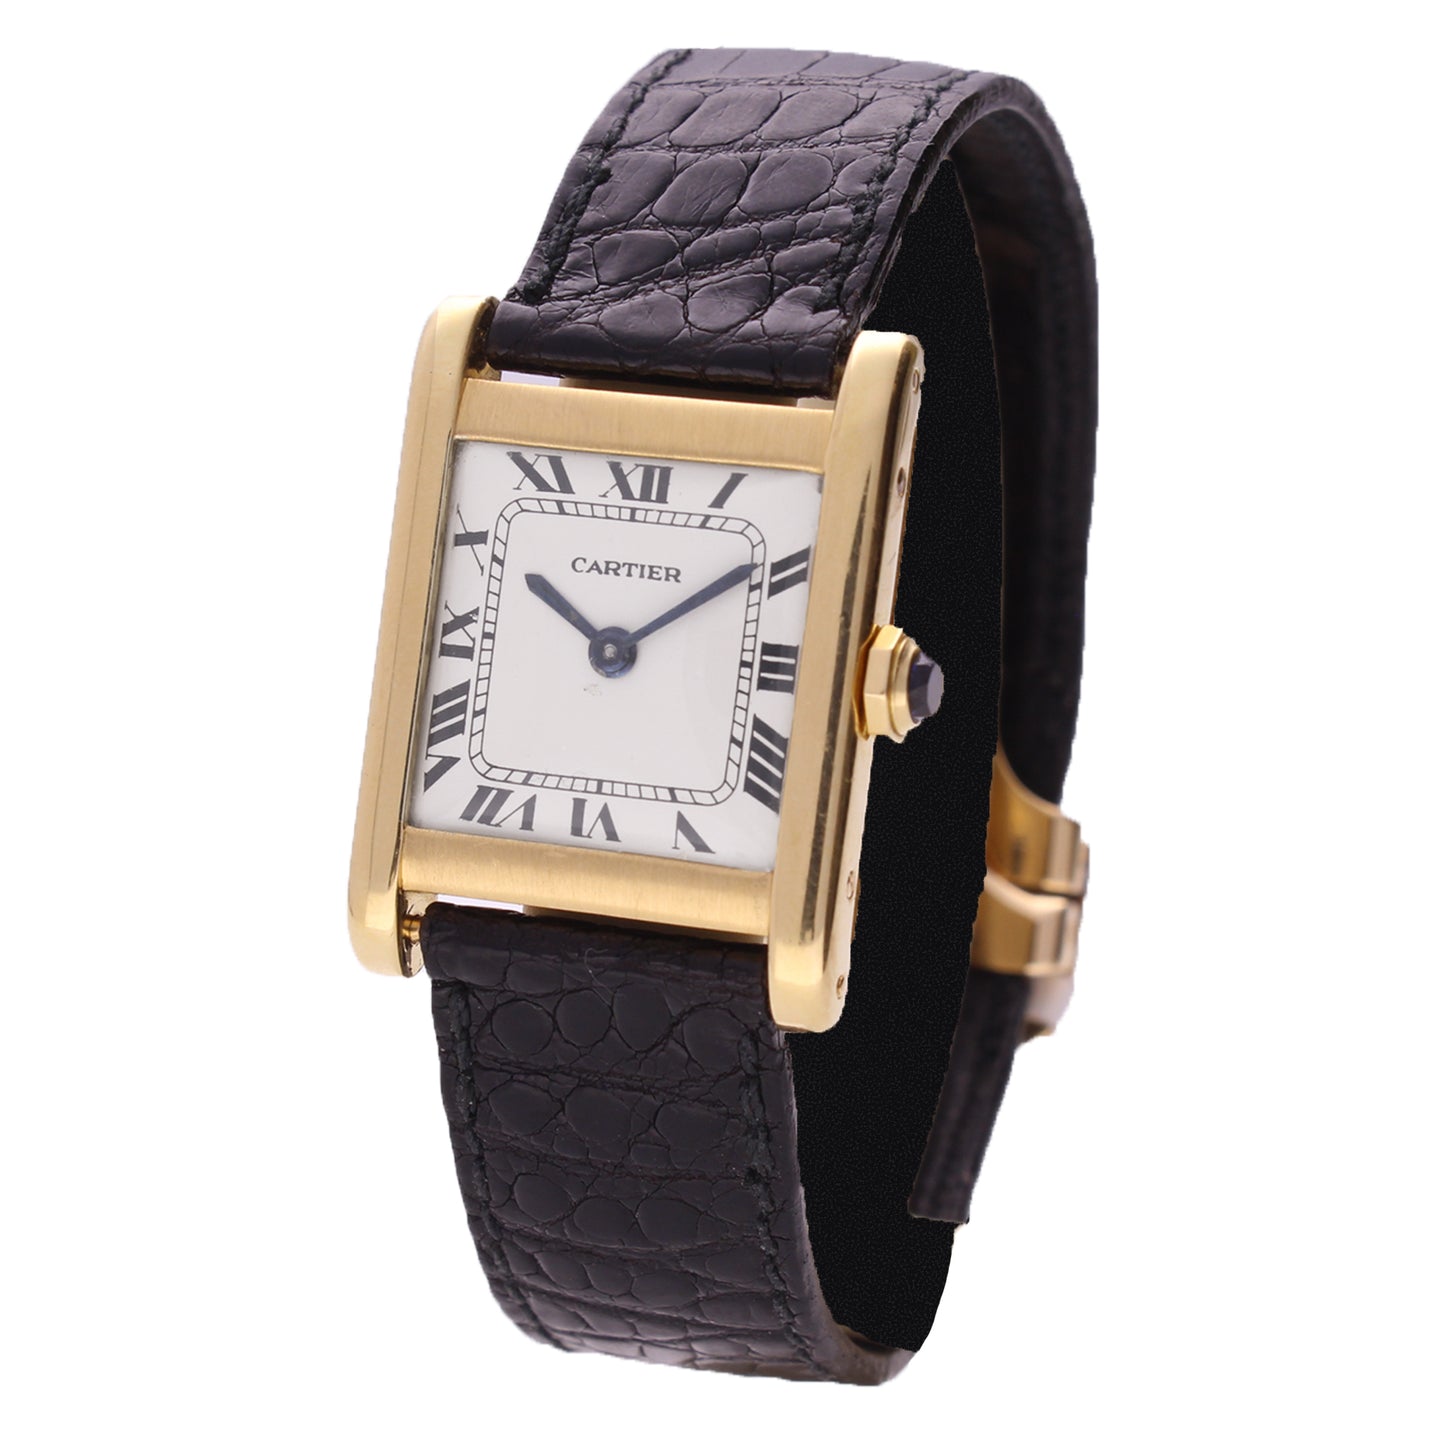 18ct yellow gold Cartier Tank 'Normale' wristwatch. Made 1950